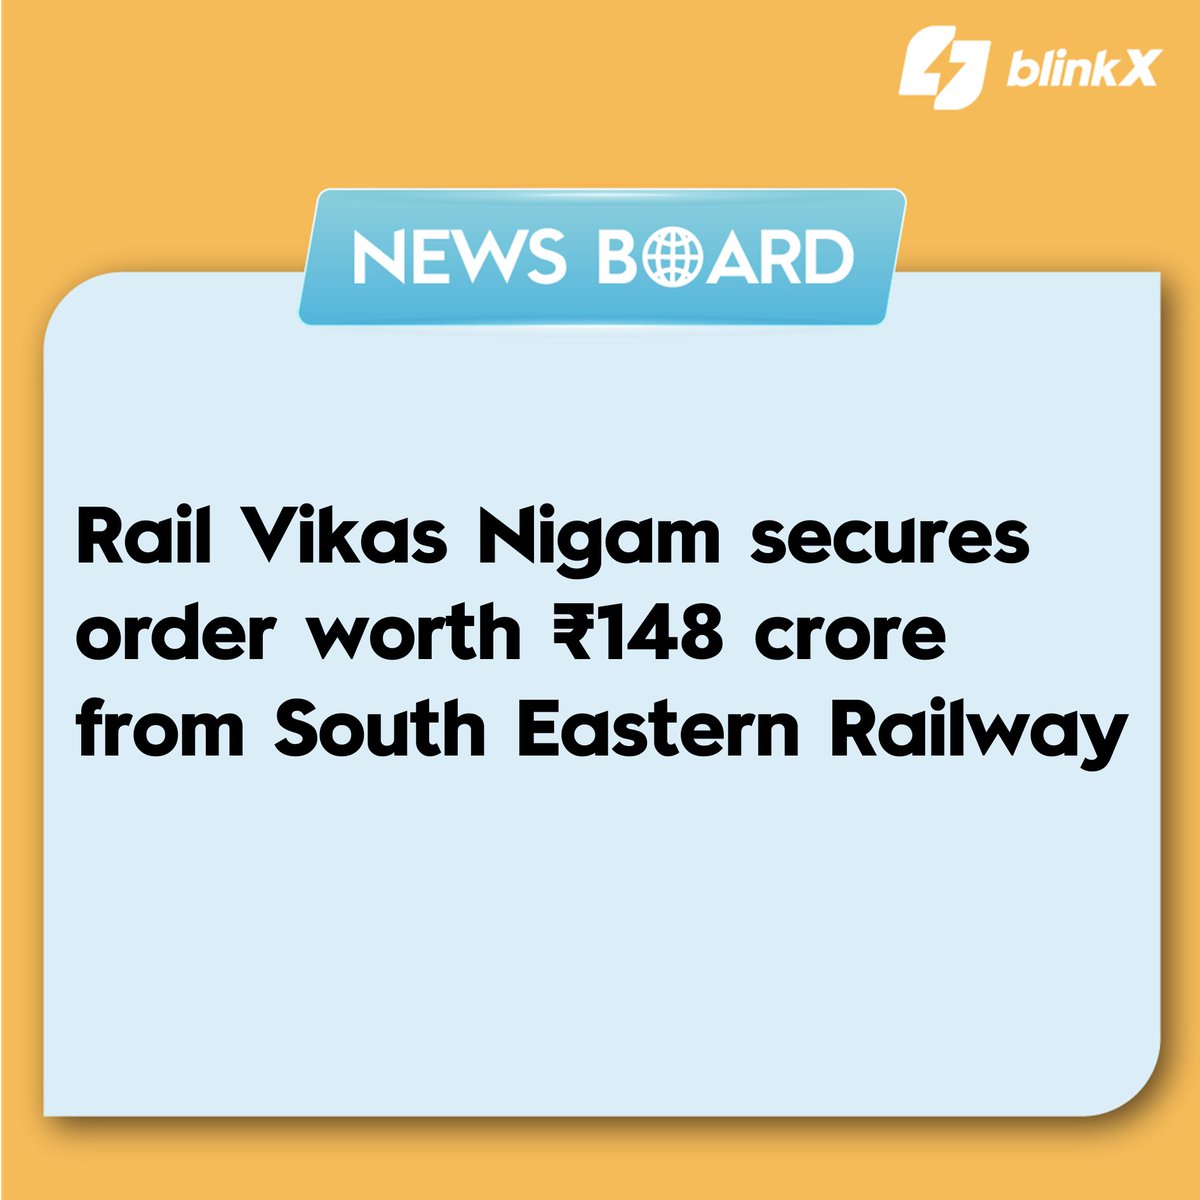 Rail Vikas Nigam Limited has received Letter of Acceptance from SOUTH EASTERN RAILWAY for upgradation of Electric traction system.

#rvnl #railway #trending #sharemarket #stockmarket #news #finance #order #deal #investment #indianrailway #blinkX #getblinkX #MadeForTheMarket